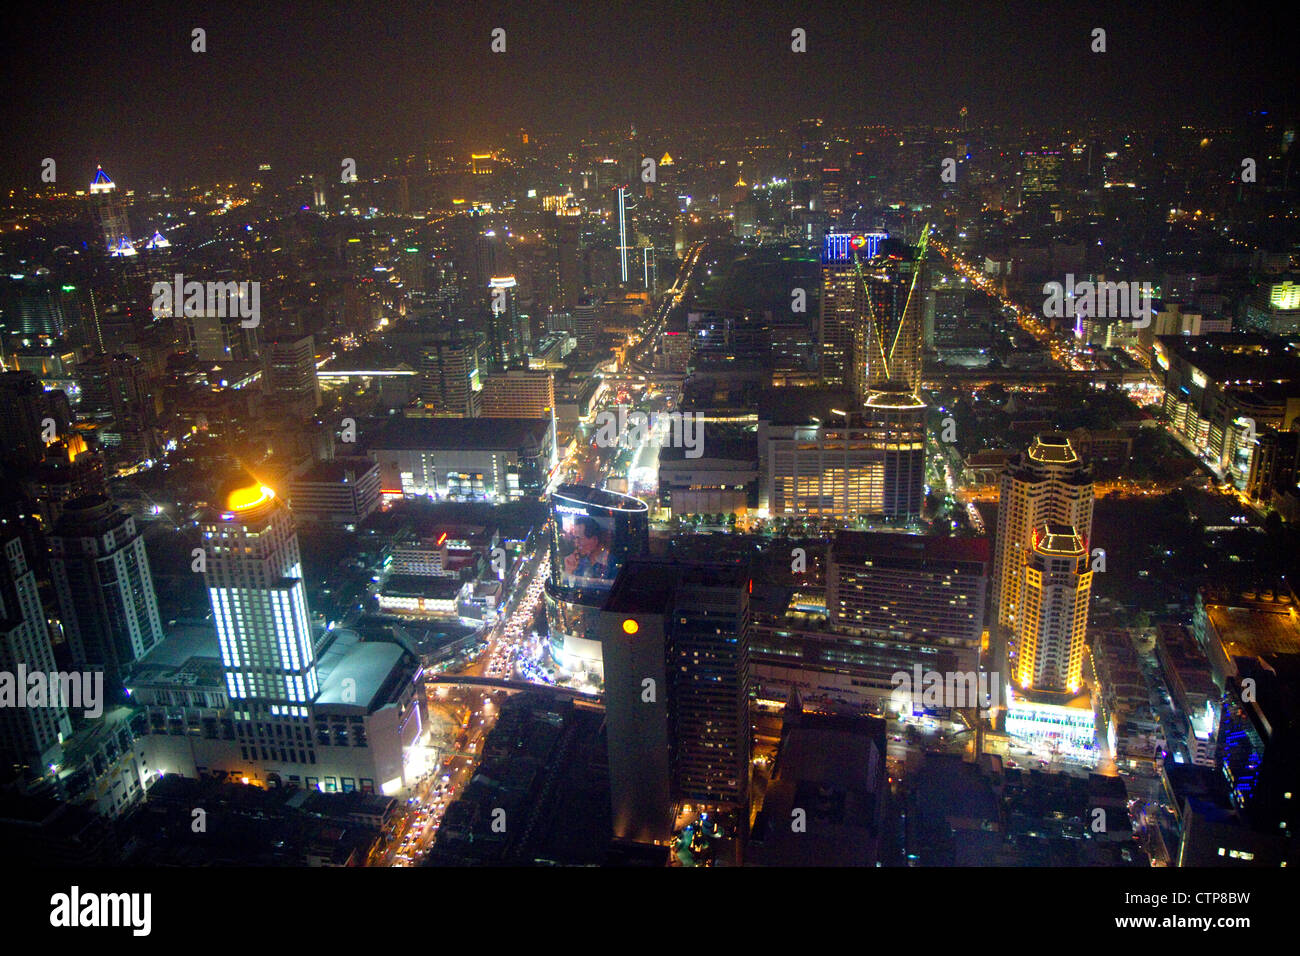 View of the Bangkok cityscape at night taken from the Baiyoke Tower II, Thailand. Stock Photo